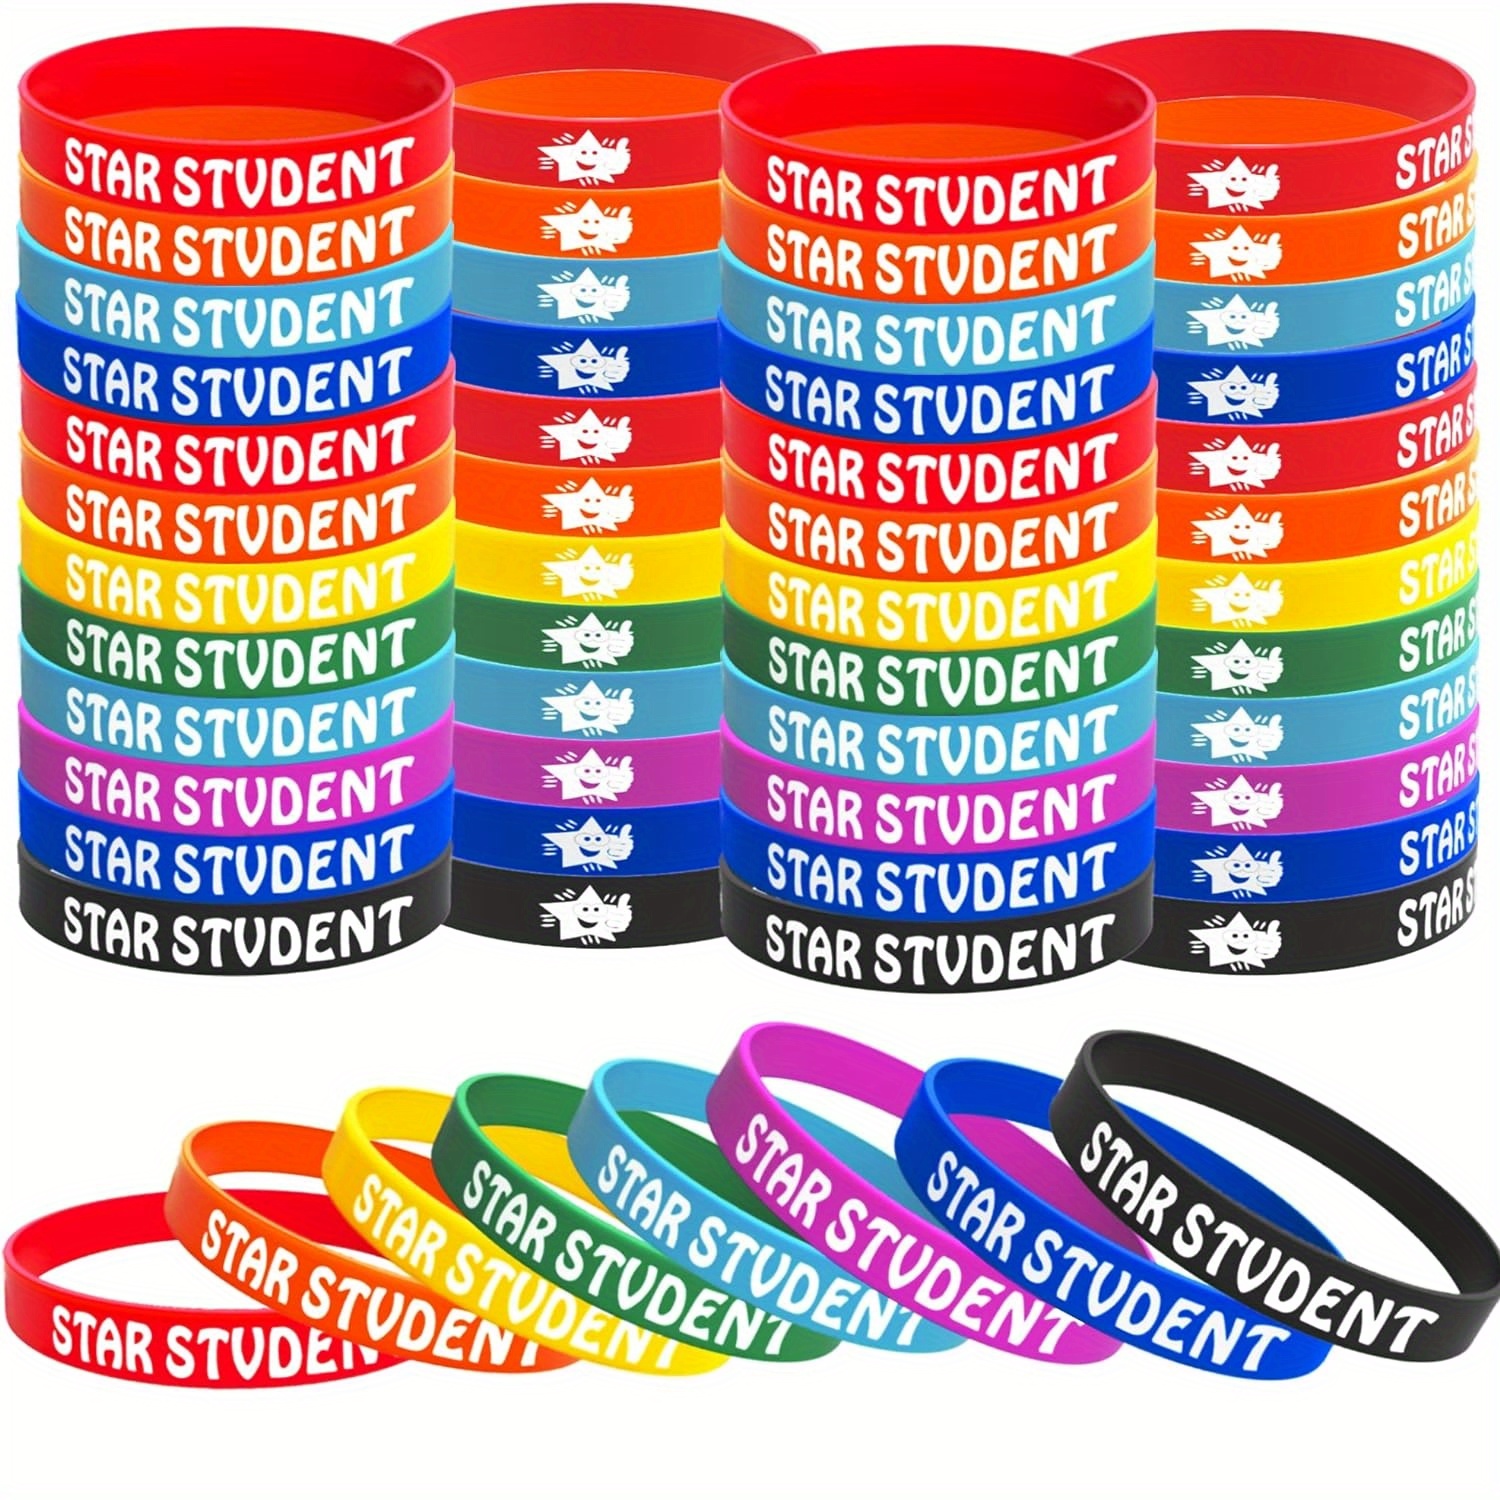 

20pcs, Star Student Wristbands-color Star Student Silicone Bracelets,star Student Rubber Bracelets For School Classroom Teacher Recognition Award, Sports Office Education Activities